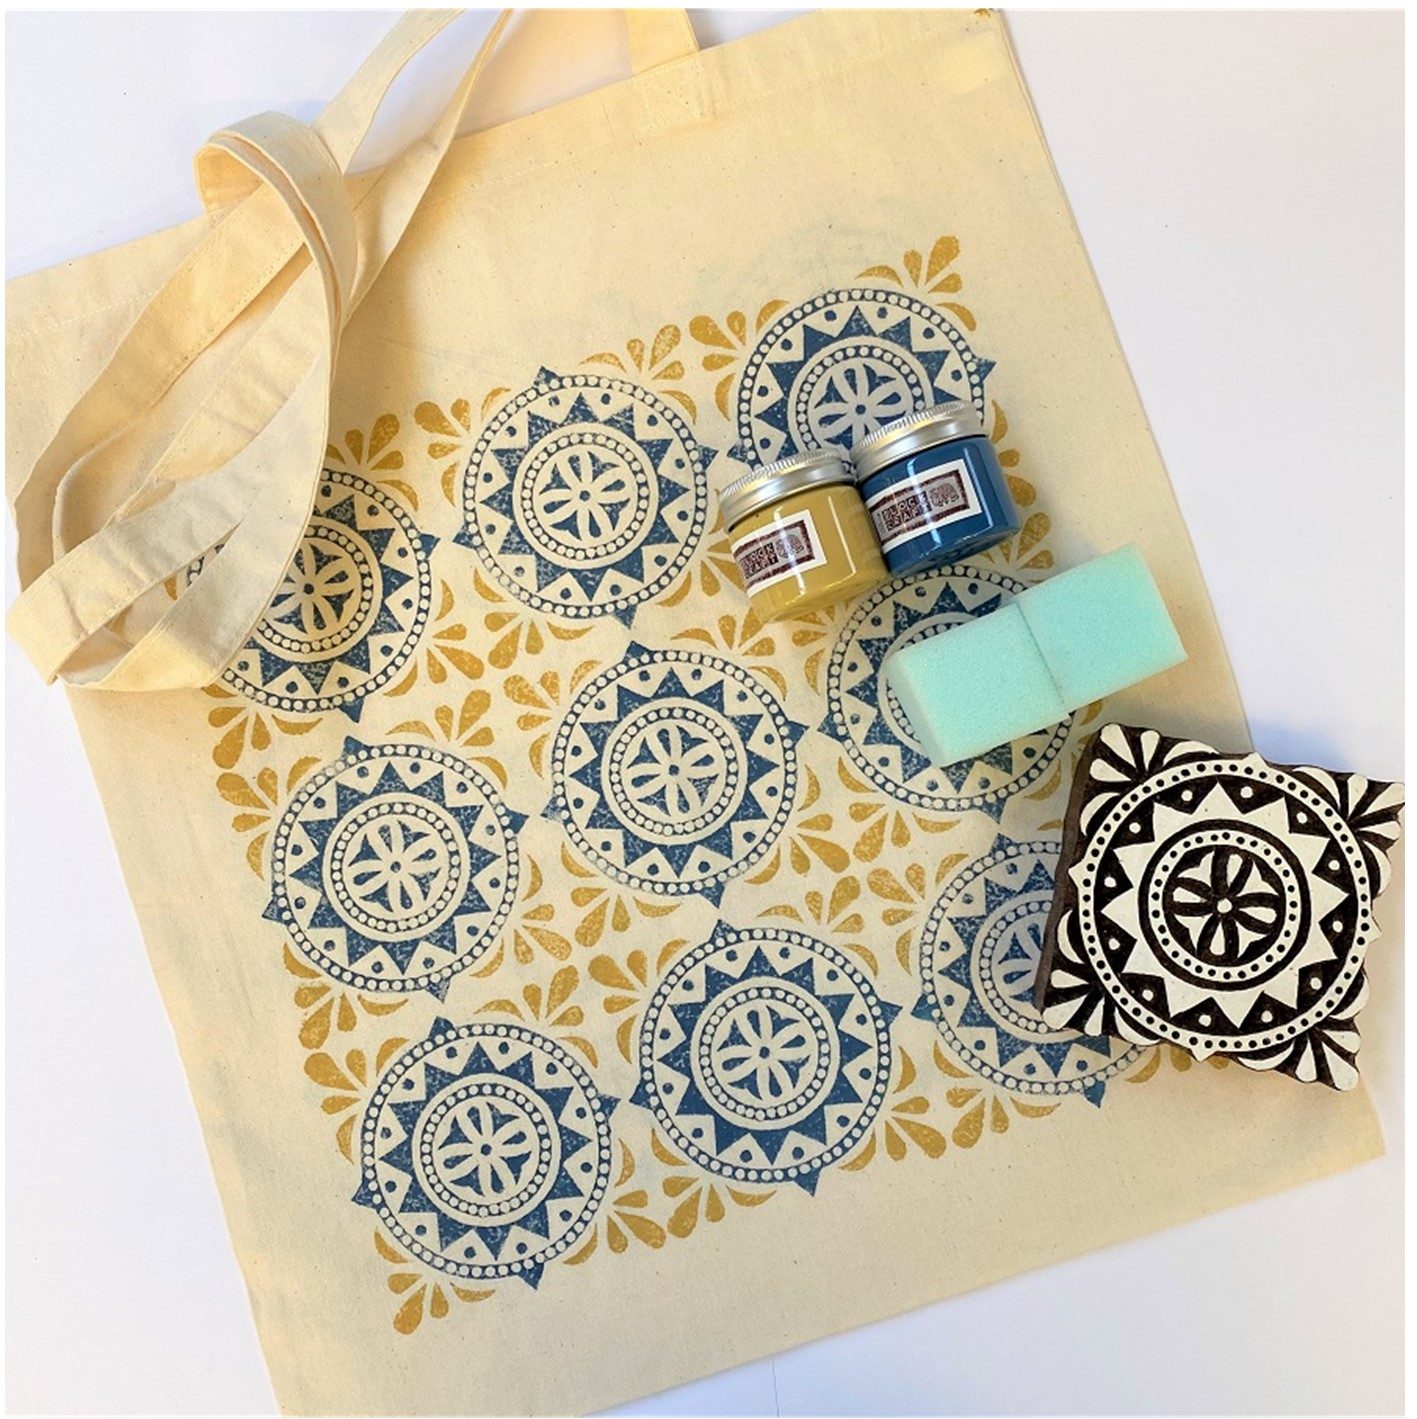 Complete Block Printing Kit: Meadow Design from The Indian Block Print Co.